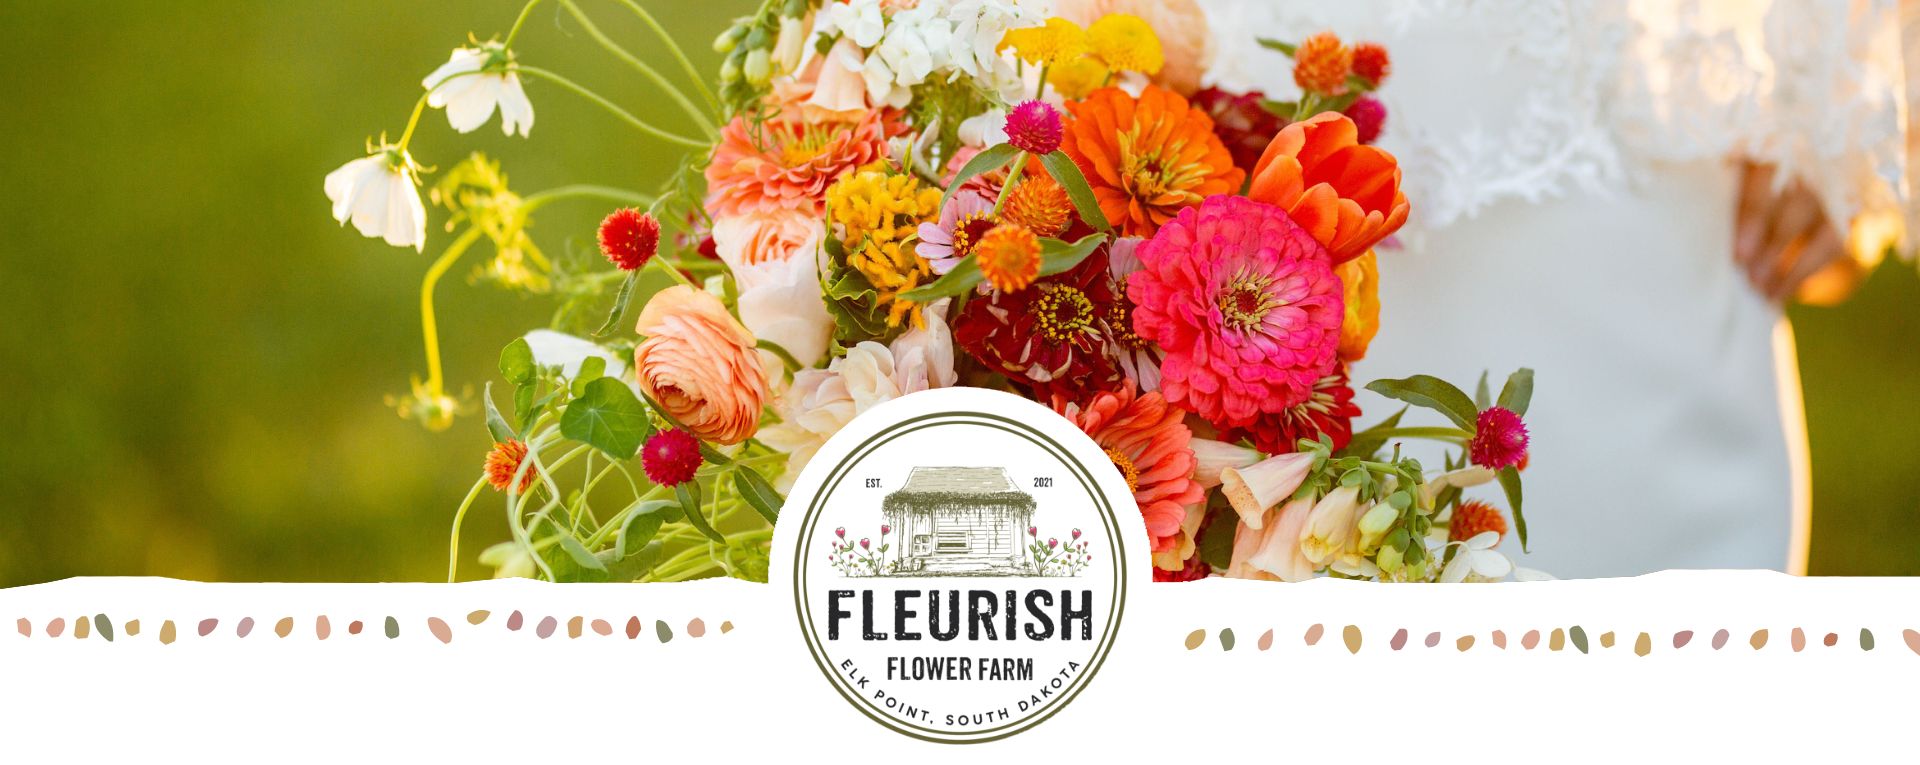 Close up image of a bride's floral bouquet from Fleurish Flower Farm.